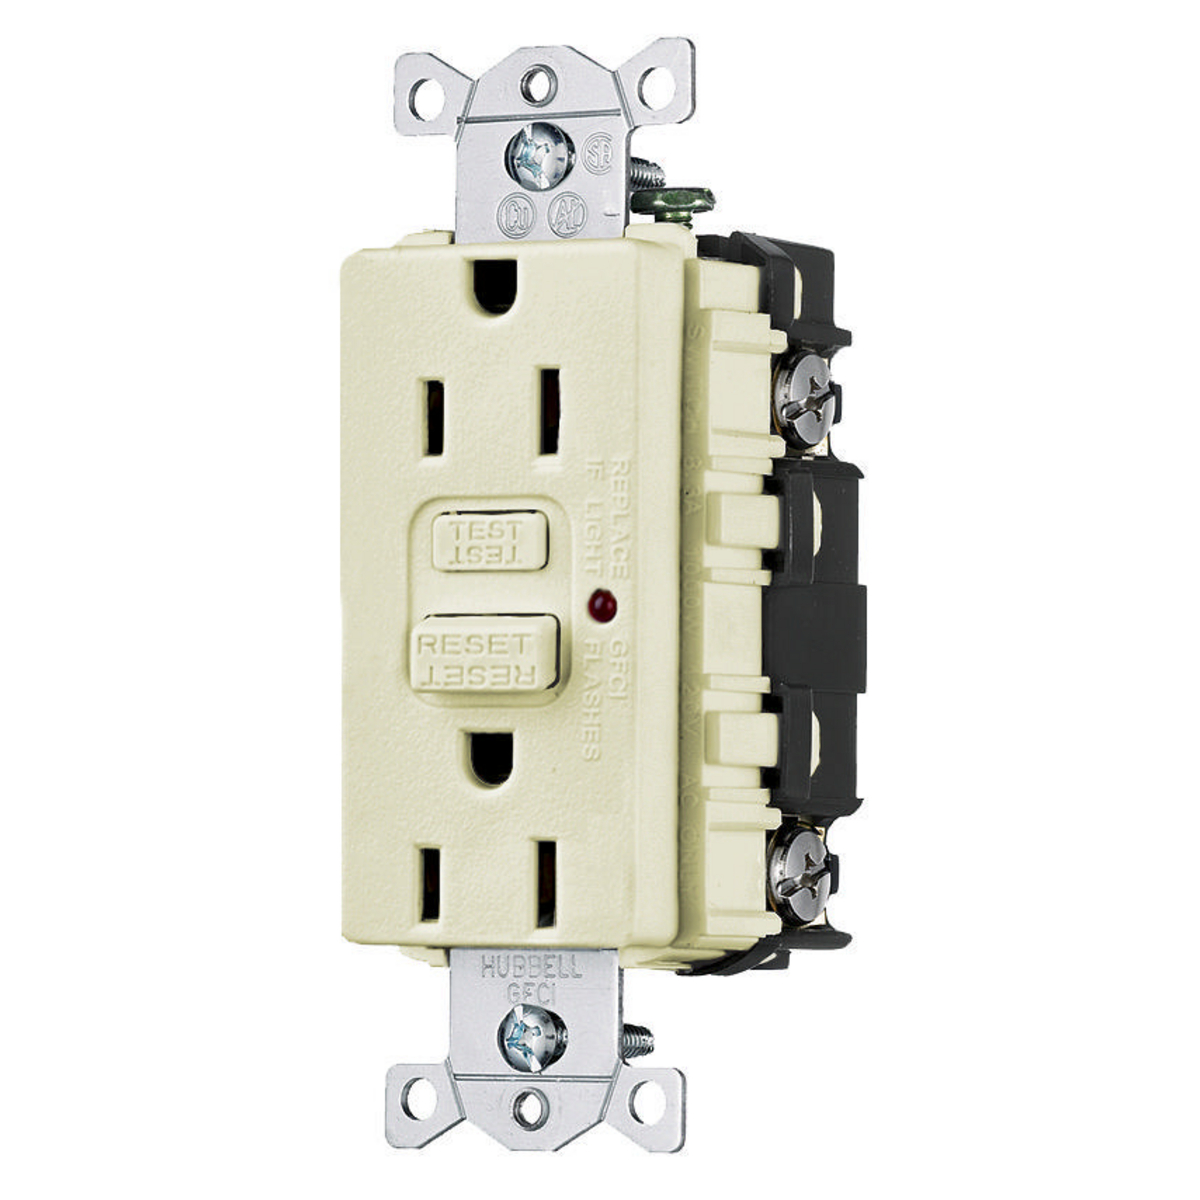 Hubbell Wiring Device Kellems, Power Protection Products, GFCIReceptacle, Duplex, Hubbell PRO, 15A 125V AC, 2-Pole 3-Wire Grounding,5-15R, Ivory